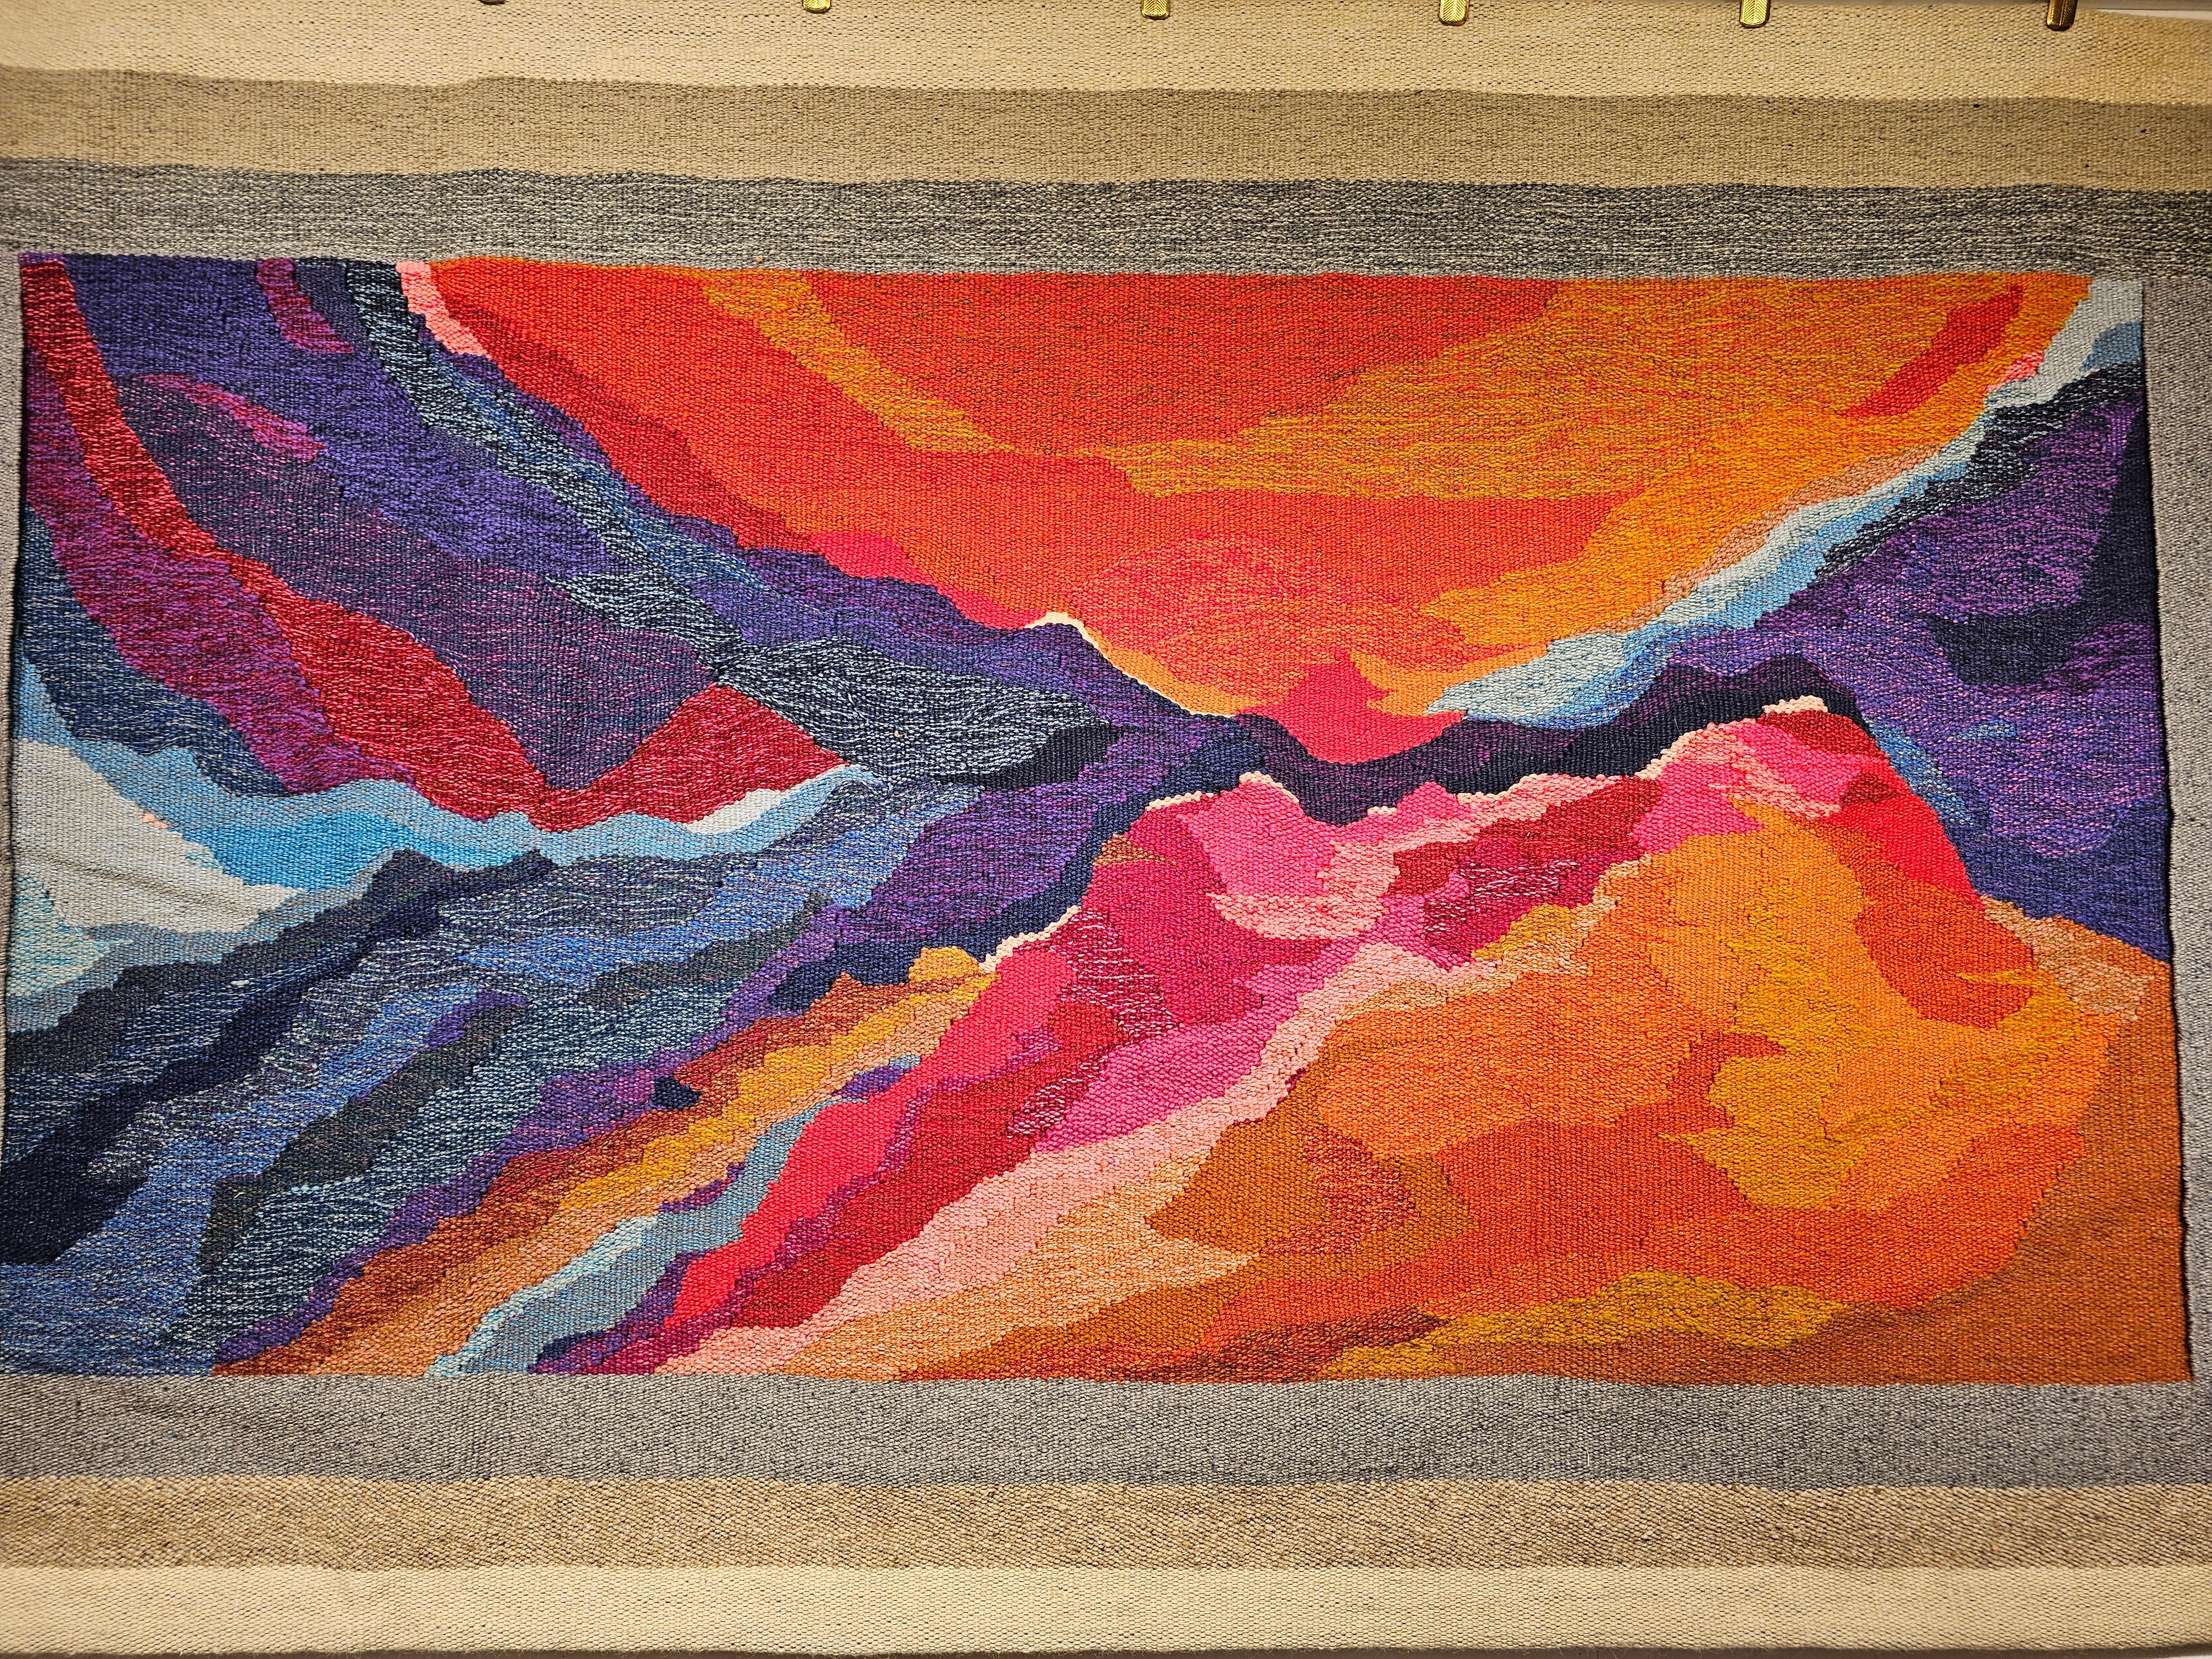 Vegetable Dyed Vintage Tapestry Capturing the Sunset Colors in the American Southwest Landscape For Sale